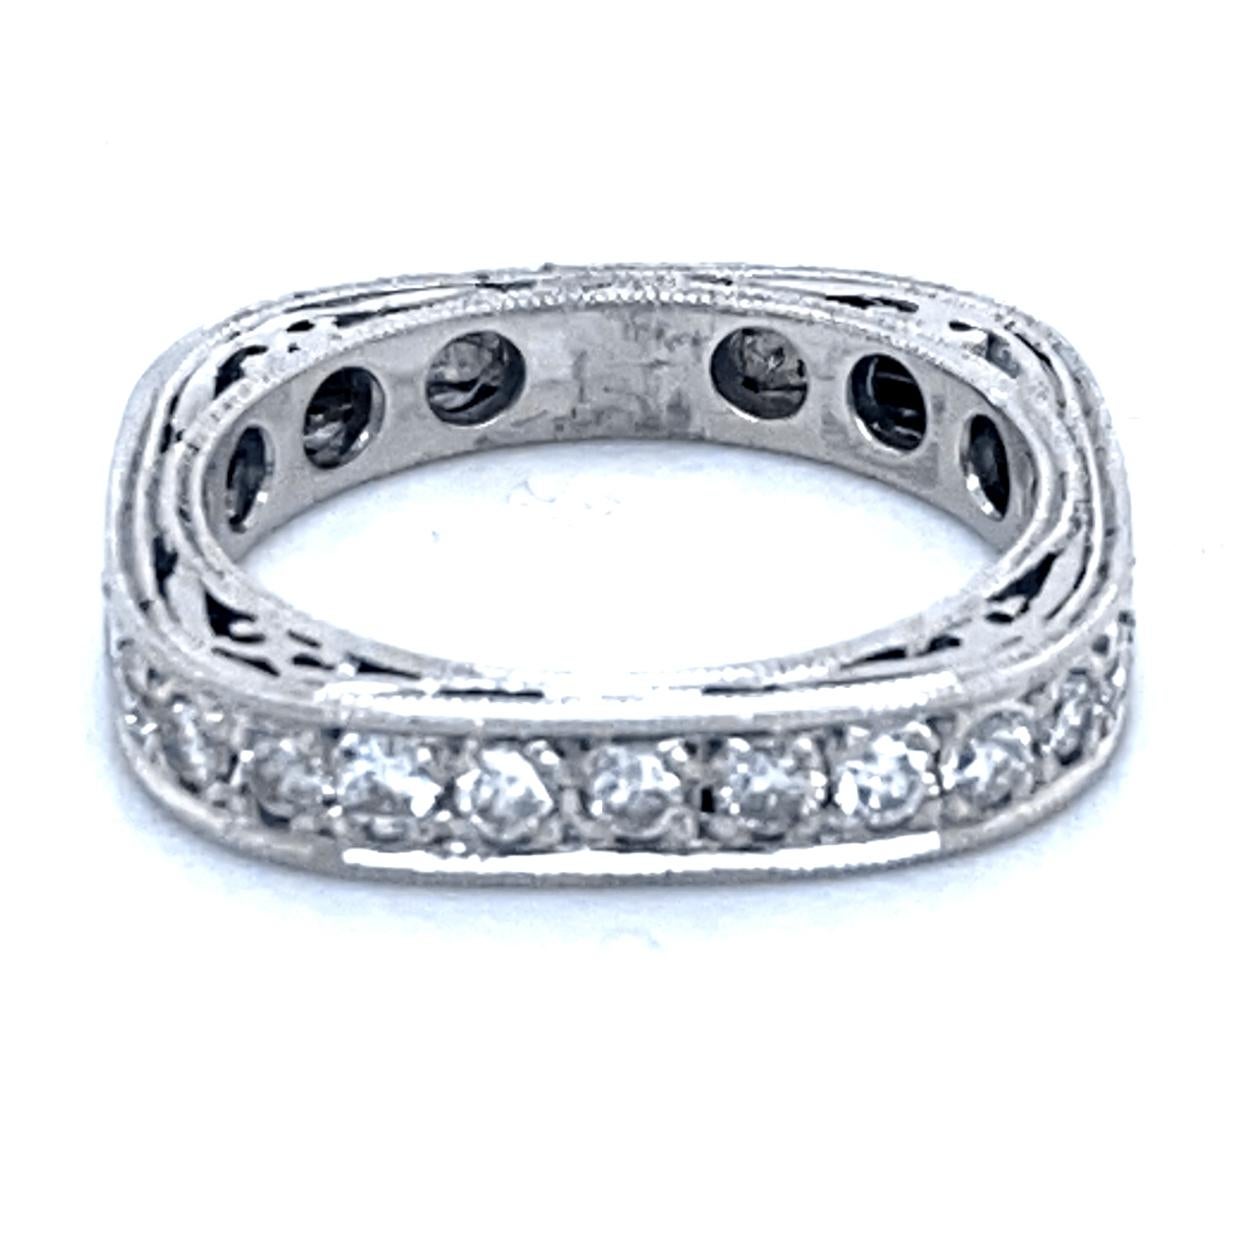 0.50 Carat Antique Style Platinum Pave Set Diamond Ring with Hand Engraving In New Condition For Sale In Los Angeles, CA